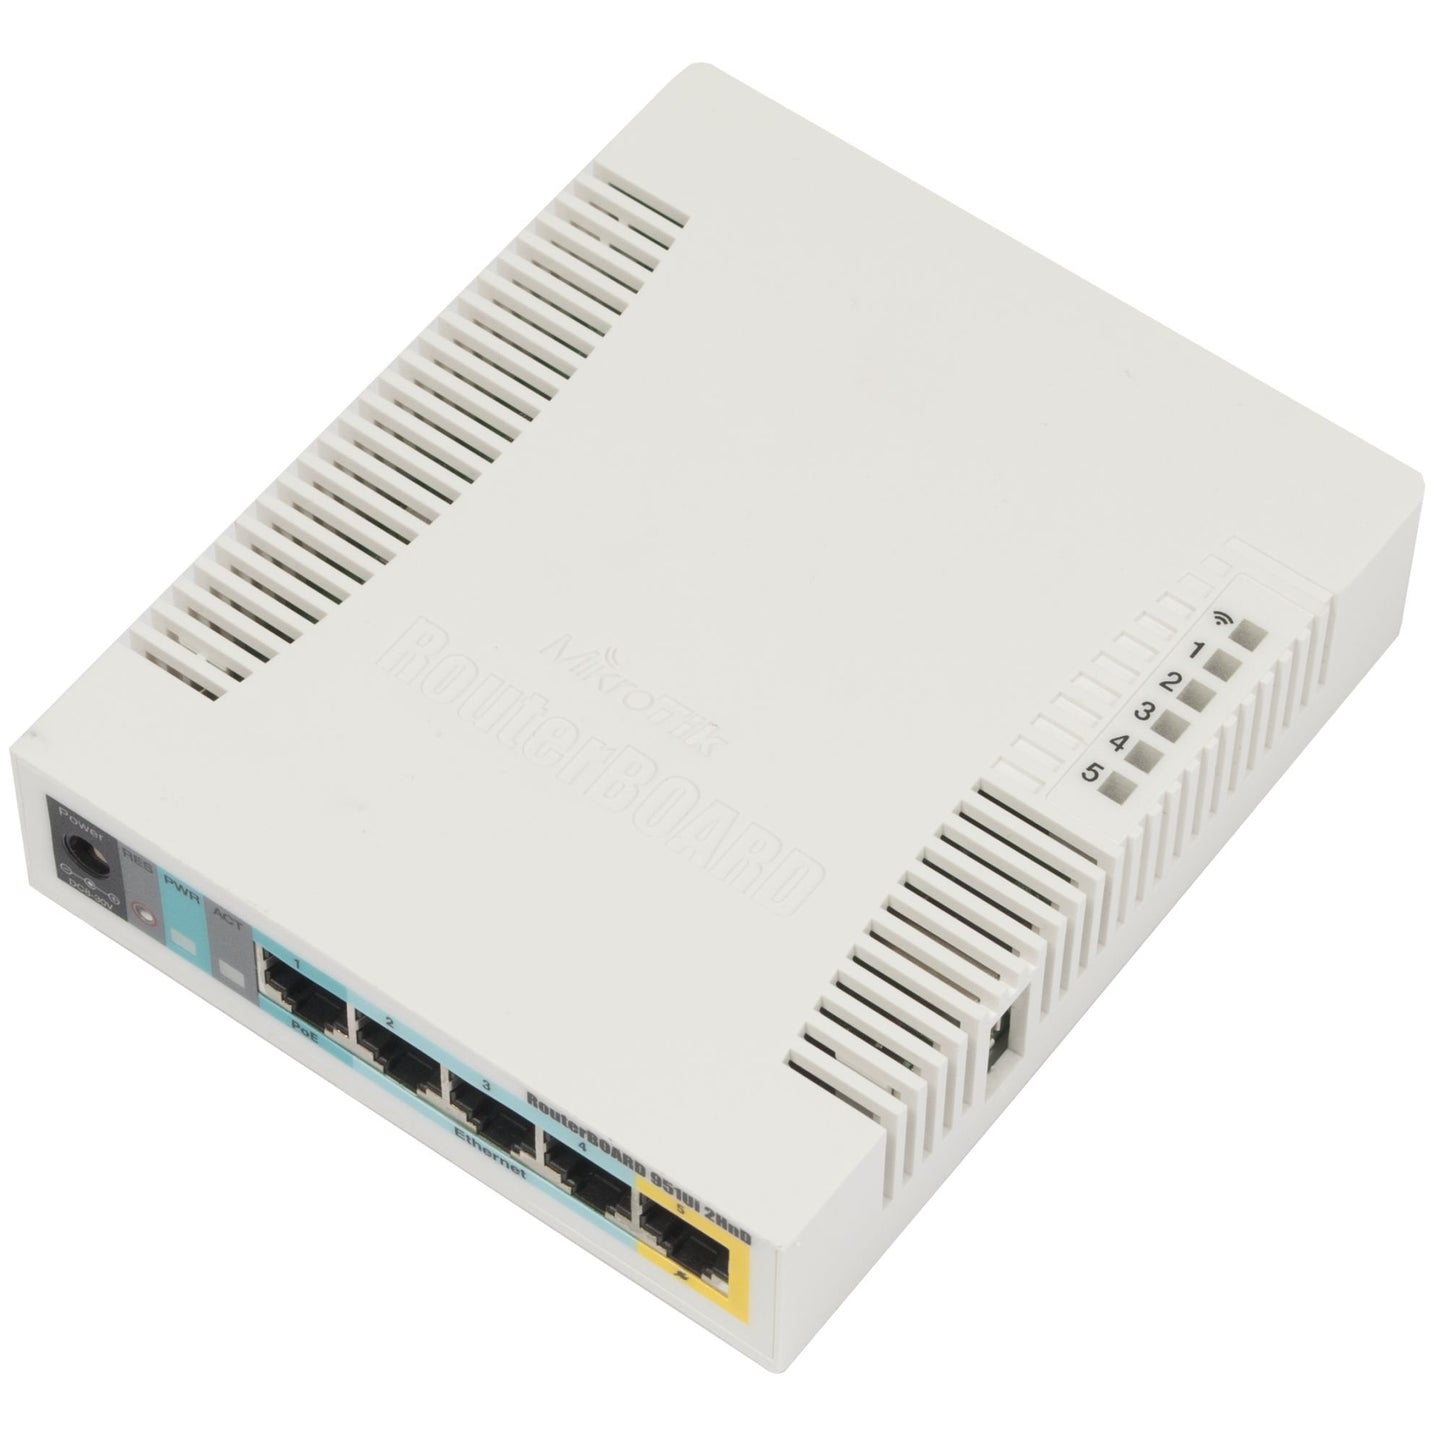 MikroTik RouterBOARD WiFi 4 Access Point - RB951Ui-2HnD